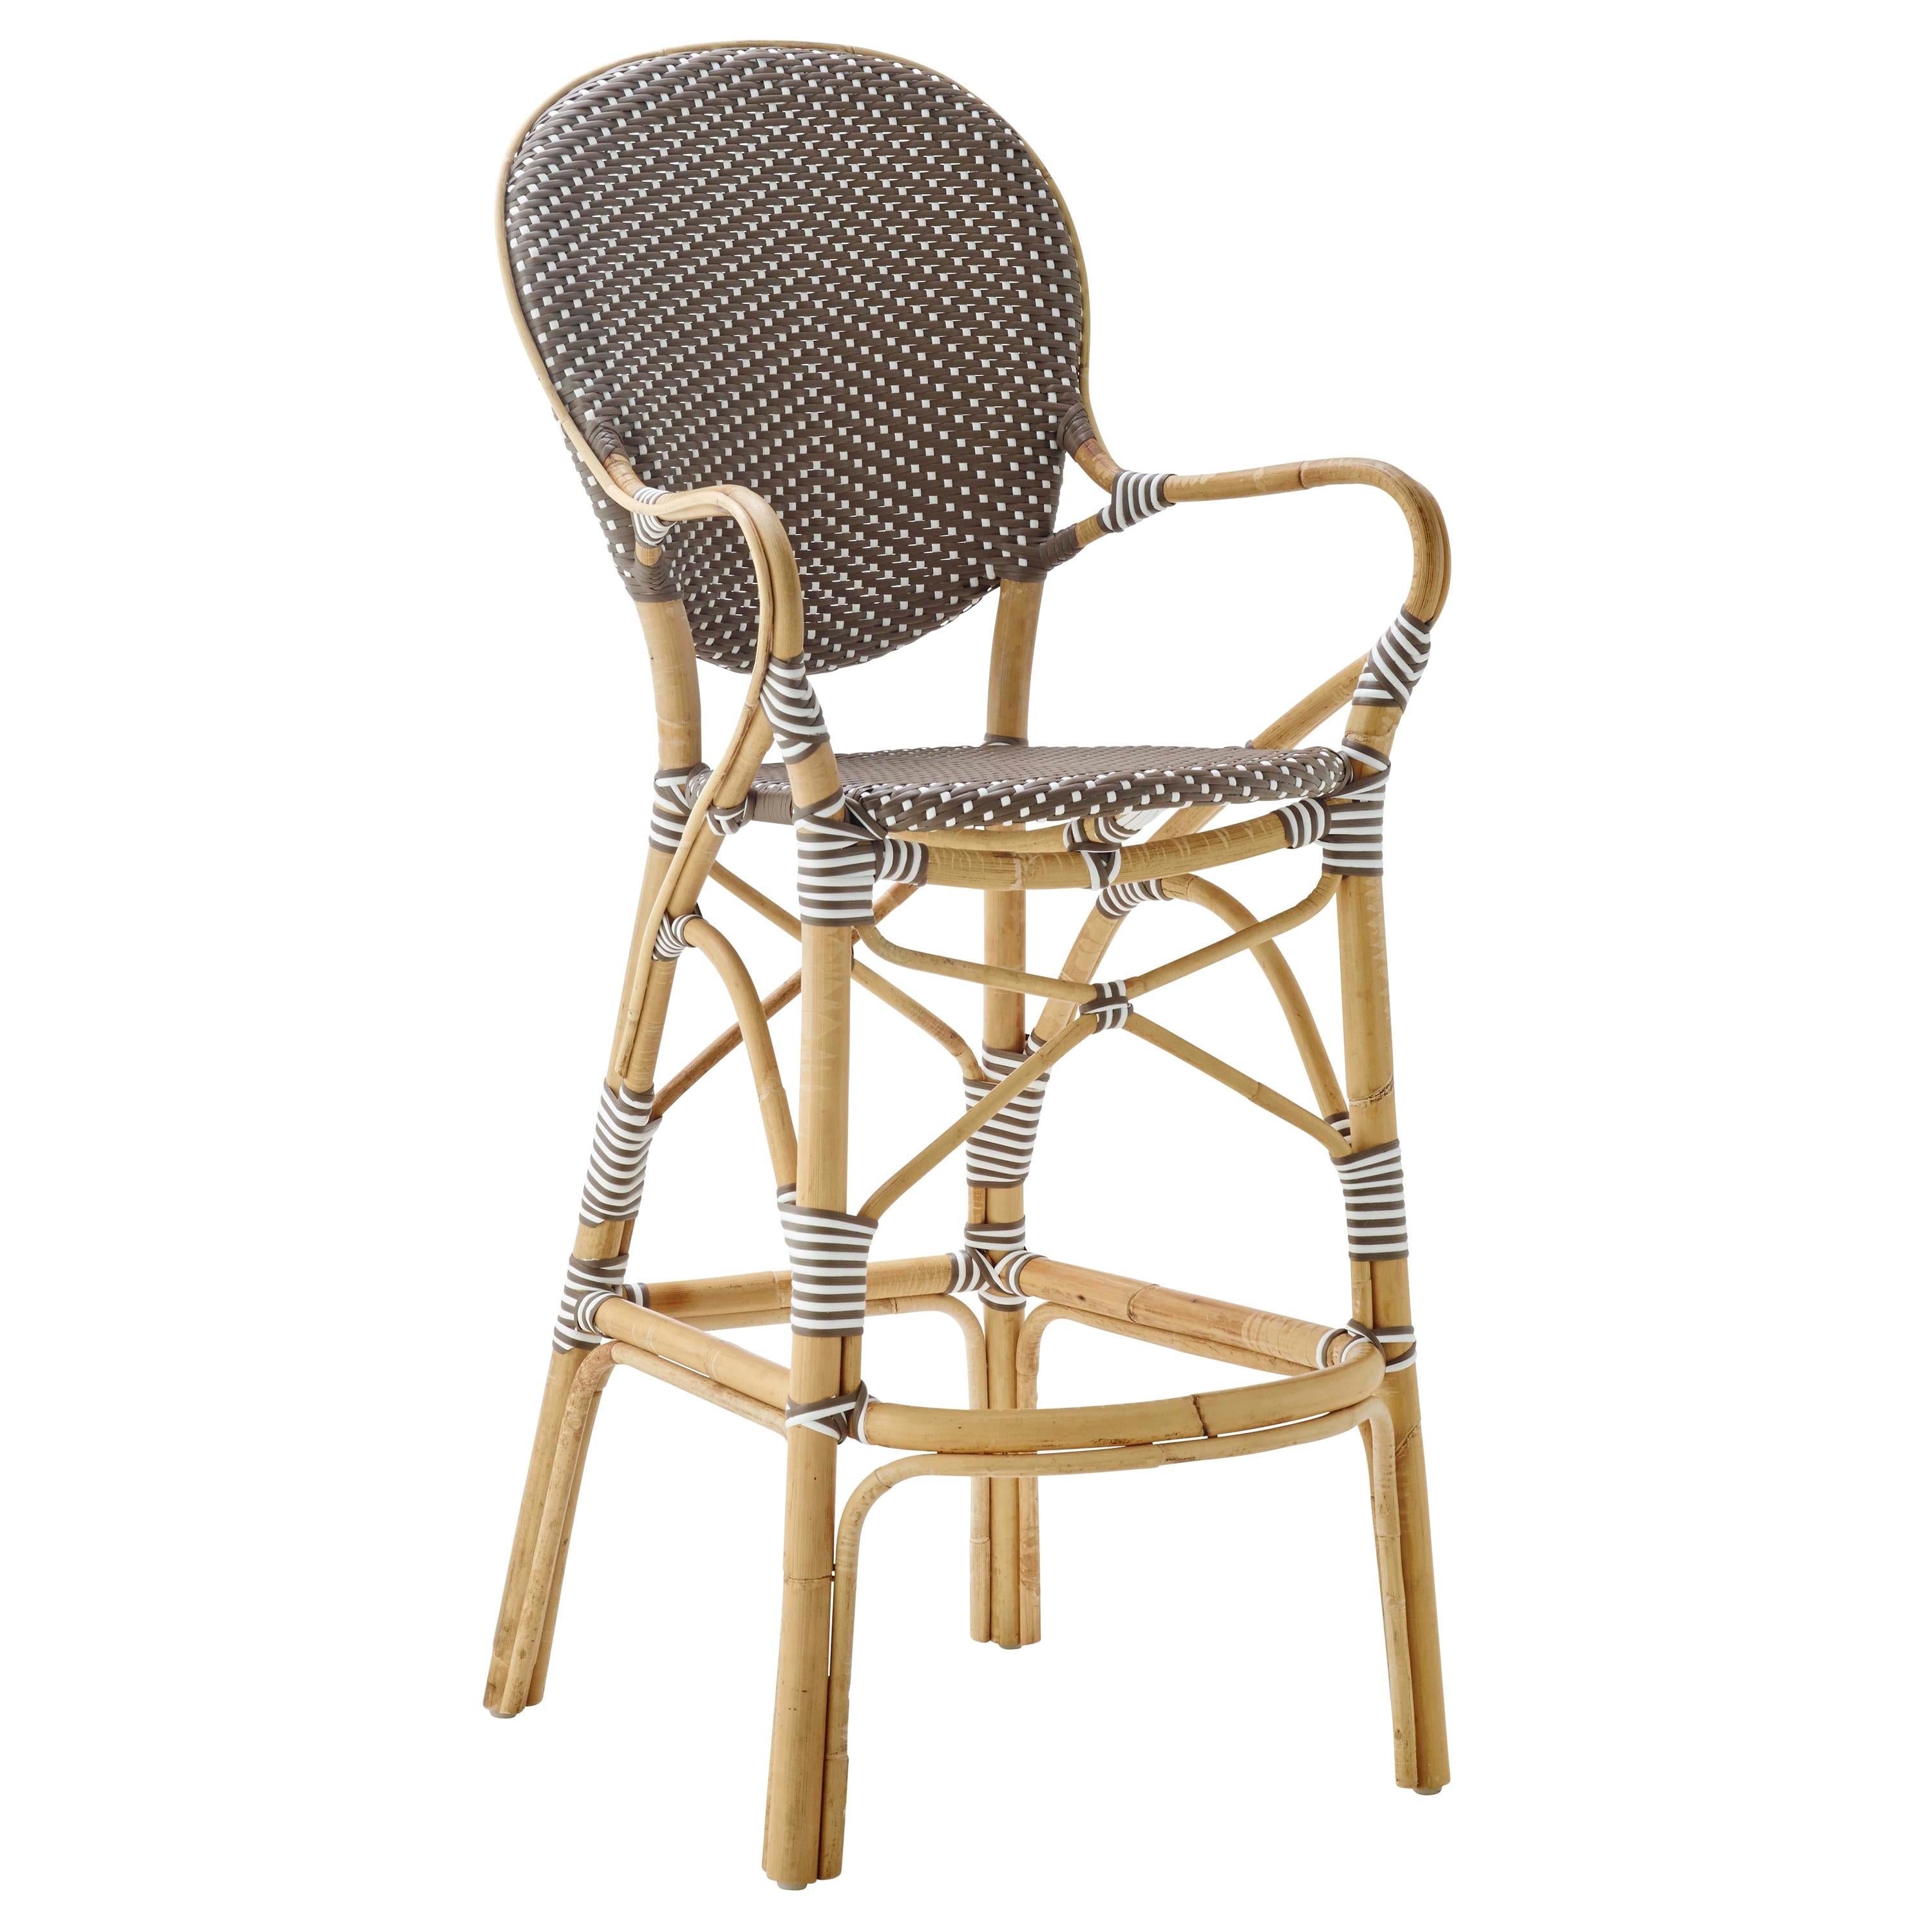 Sika Design Isabell Woven Rattan Bistro Bar Stool in Cappuccino with White Dots